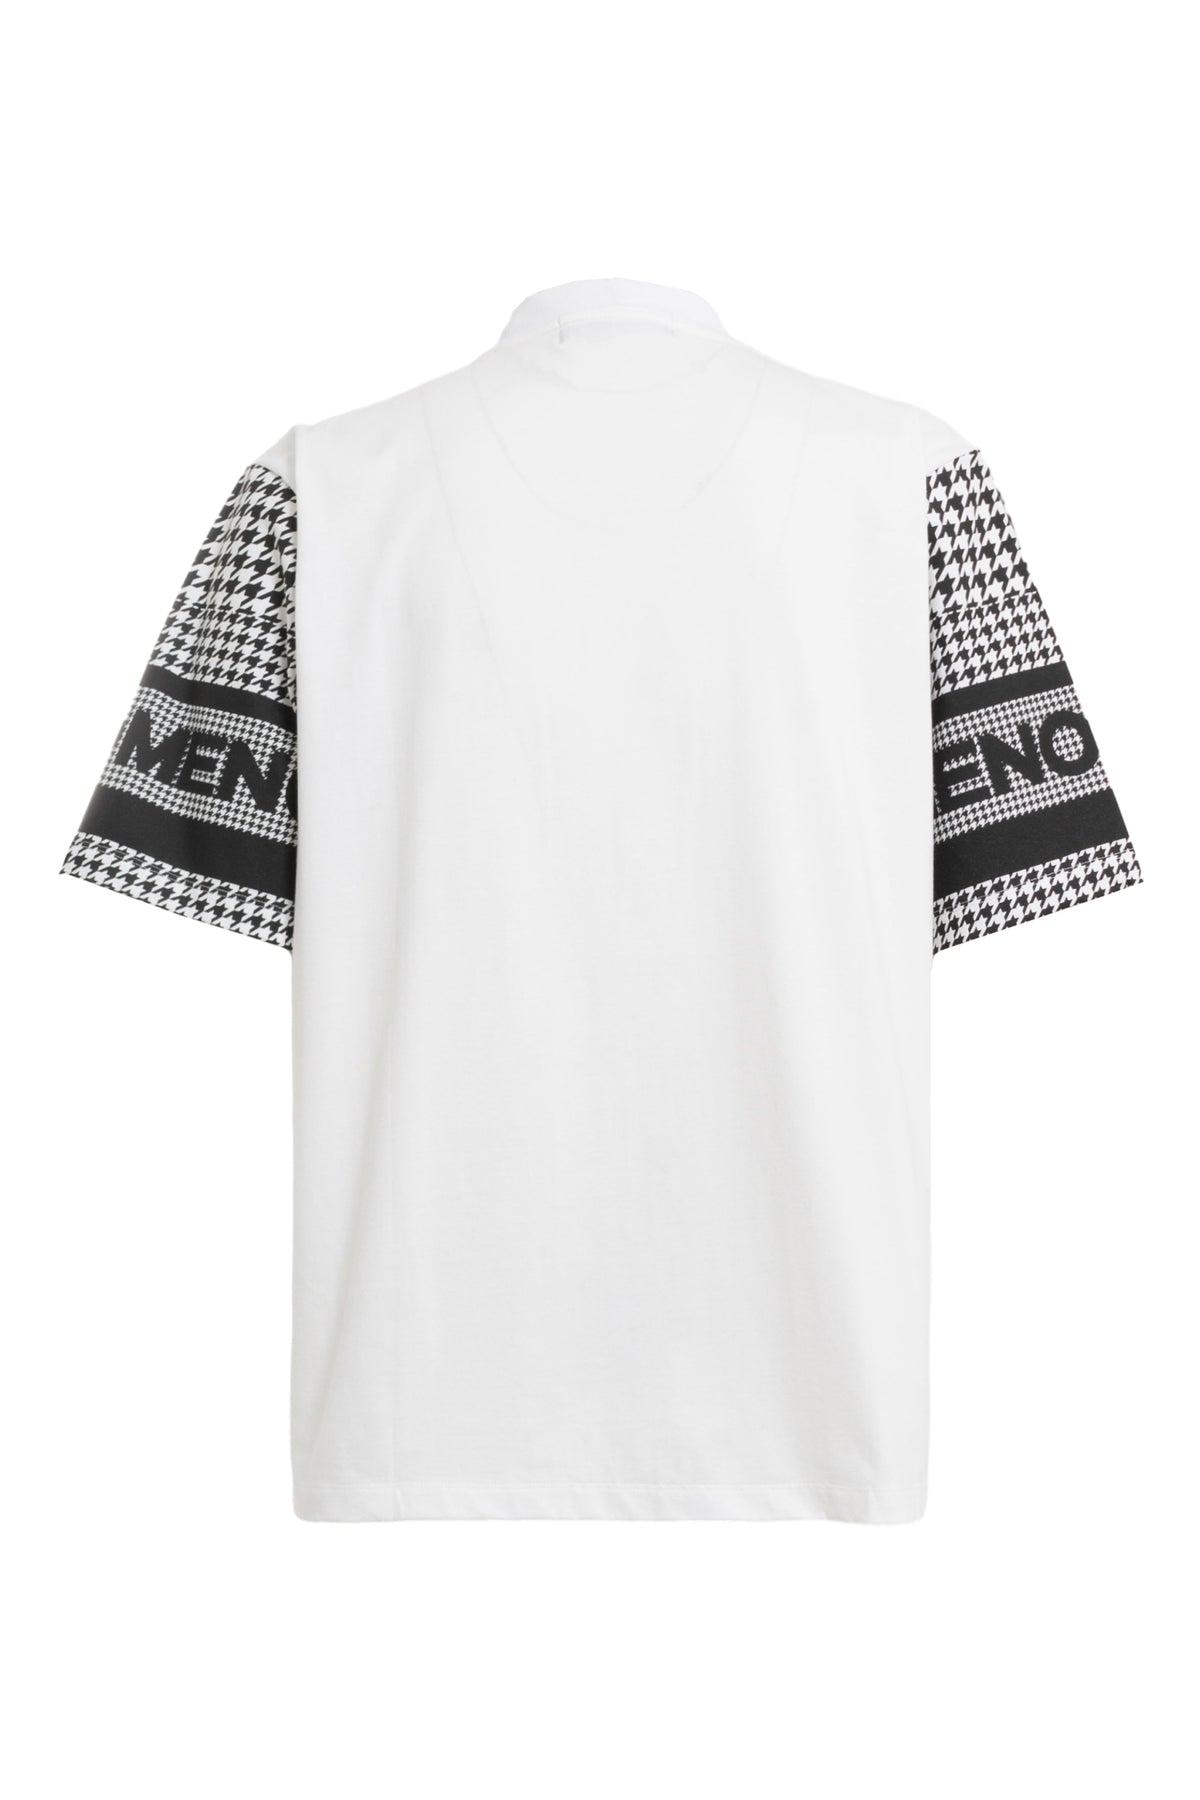 HOUNDSTOOTH SS TEE / WHT